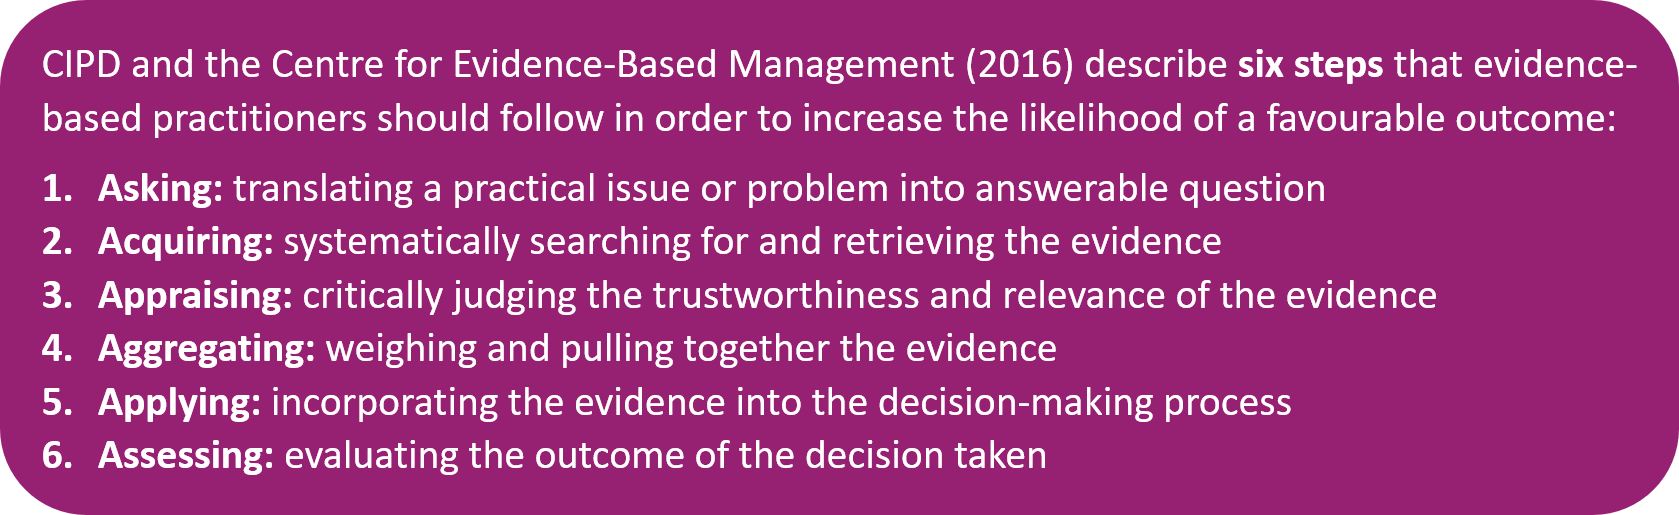 How Important is Evidence-Based Practice for Organisational Success? 3